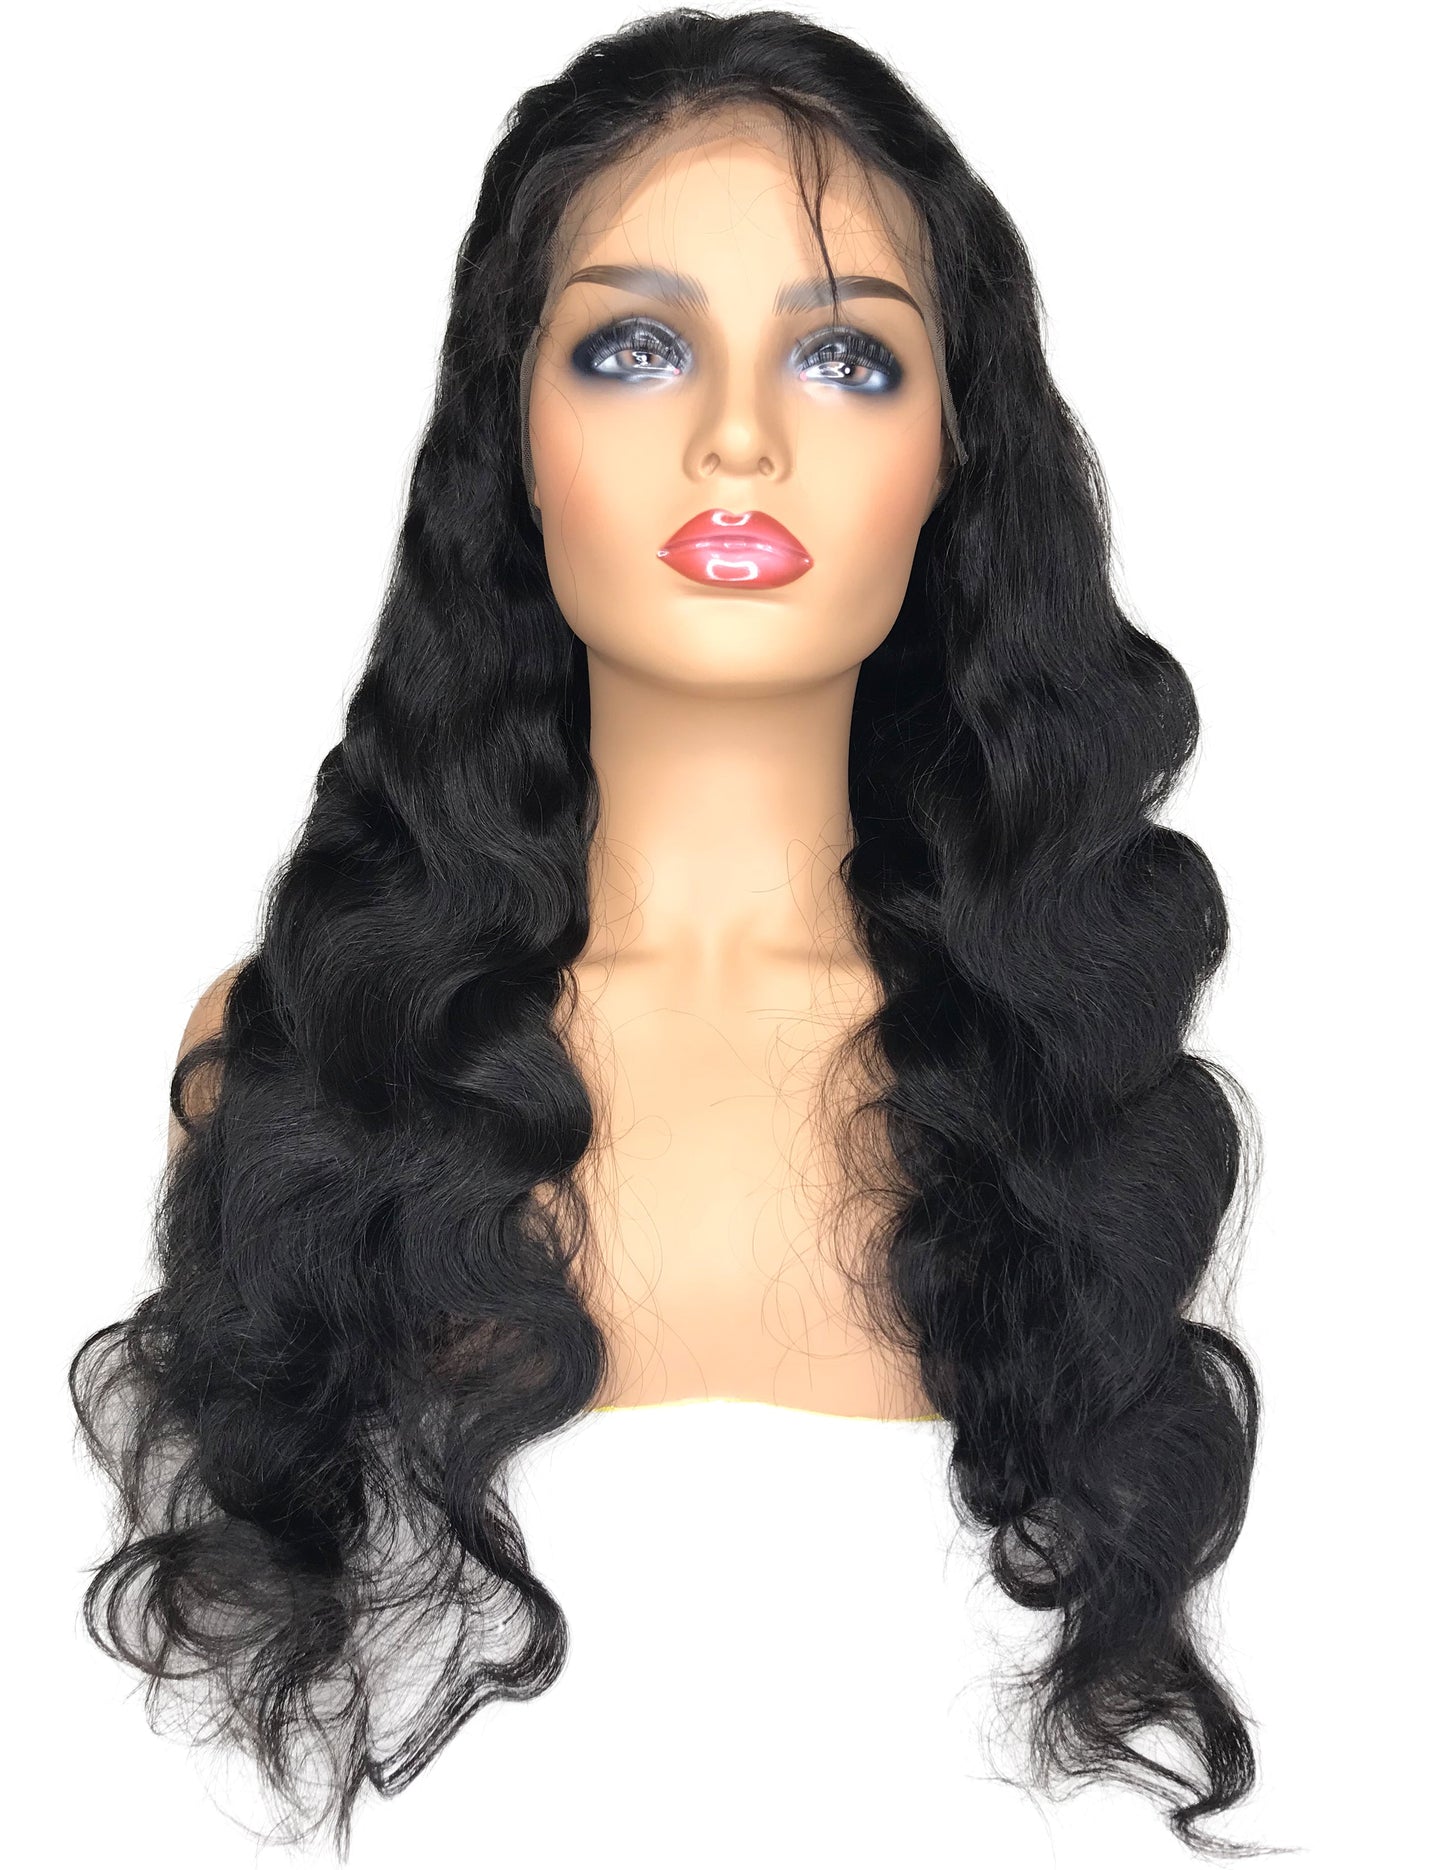 8A Malaysian Body Wave Lace Frontal Human Hair Wig - eHair Outlet